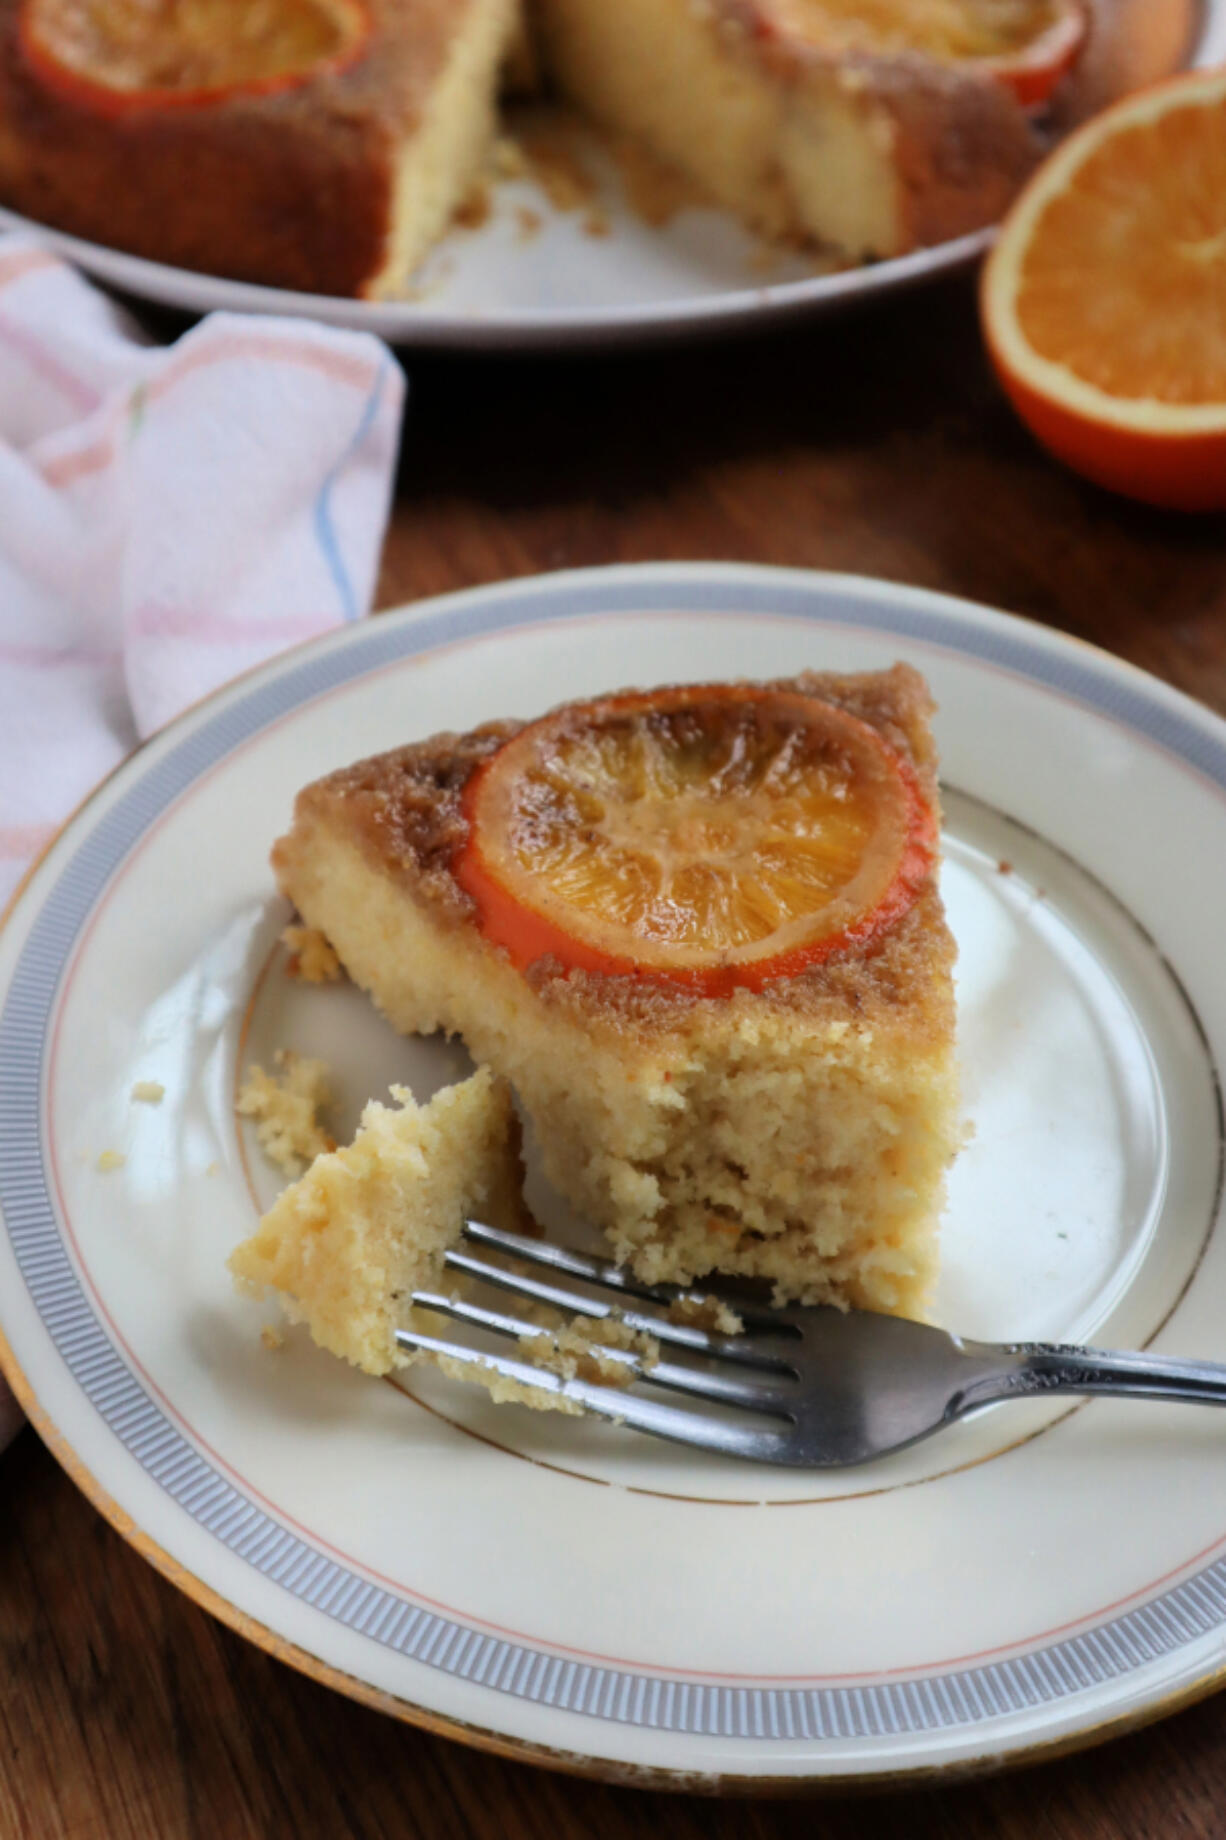 Flavored with orange zest and juice, the easy cornmeal cake is topped with a spiral of fresh orange slices that are candied during the baking process.